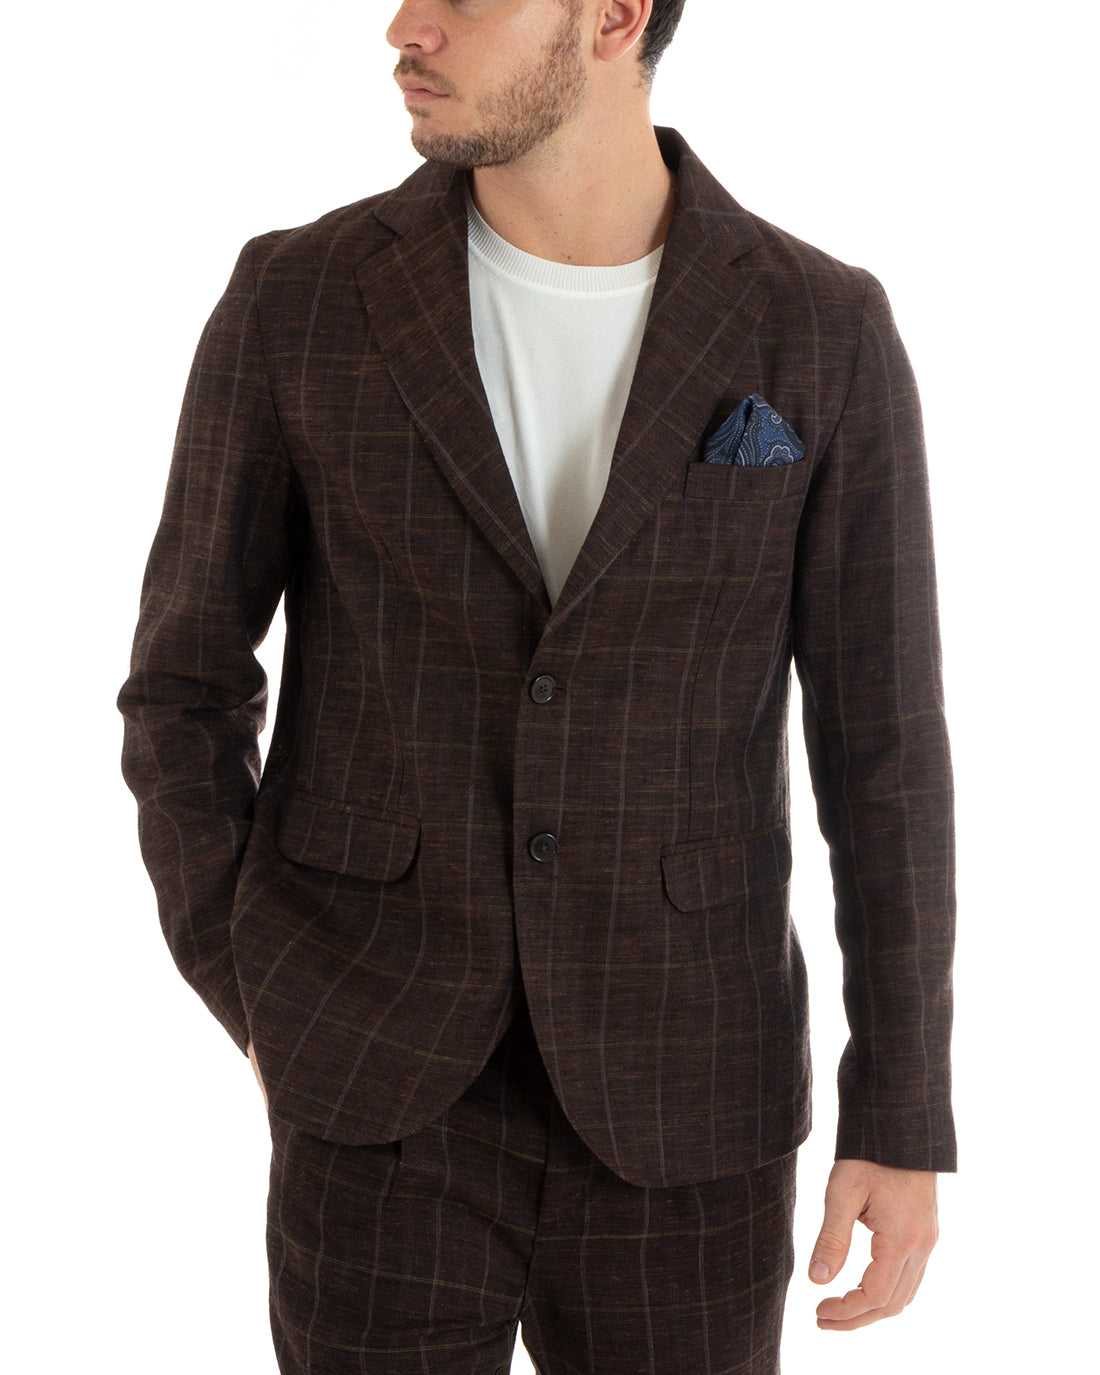 Single Breasted Men's Suit Brown Linen Check Tailored Jacket Trousers Elegant Casual GIOSAL-OU2291A